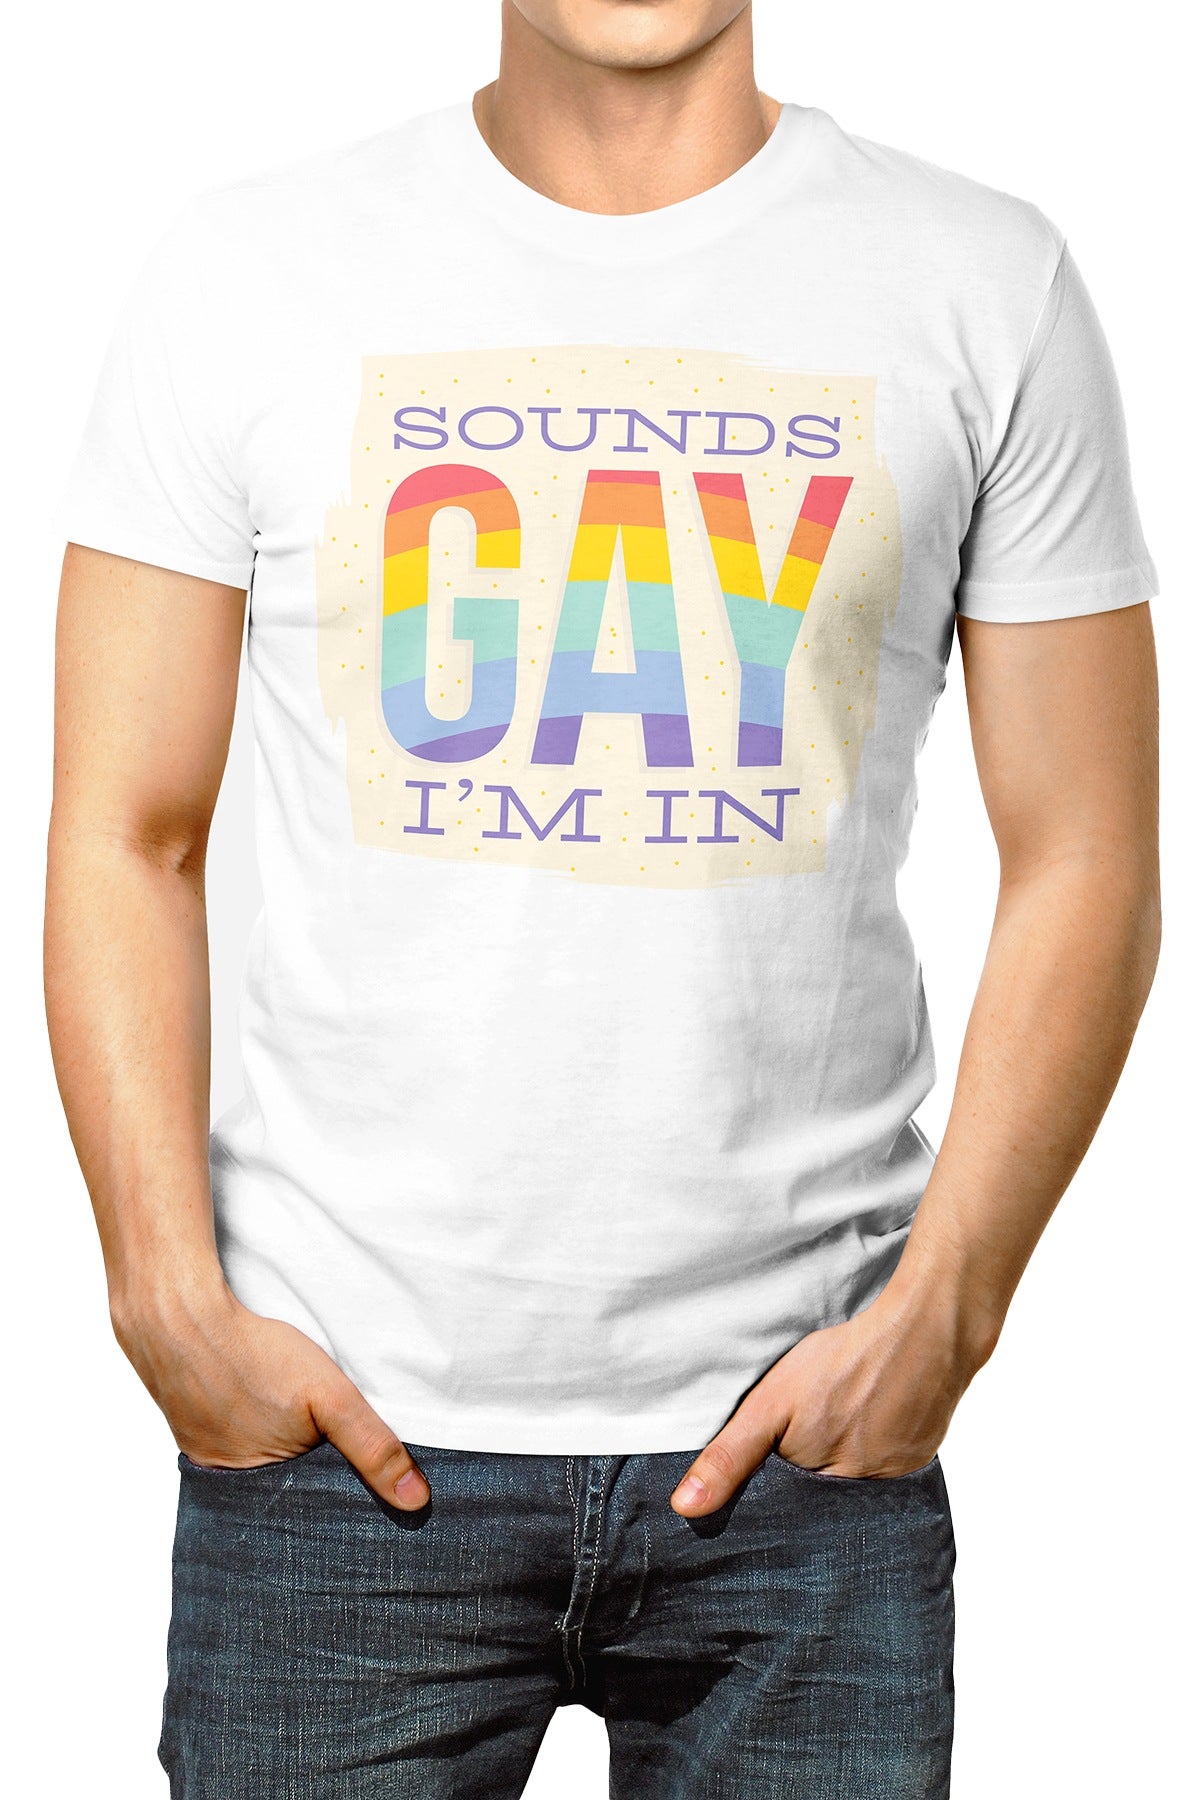 LowTee Sounds Gay Graphic Tee